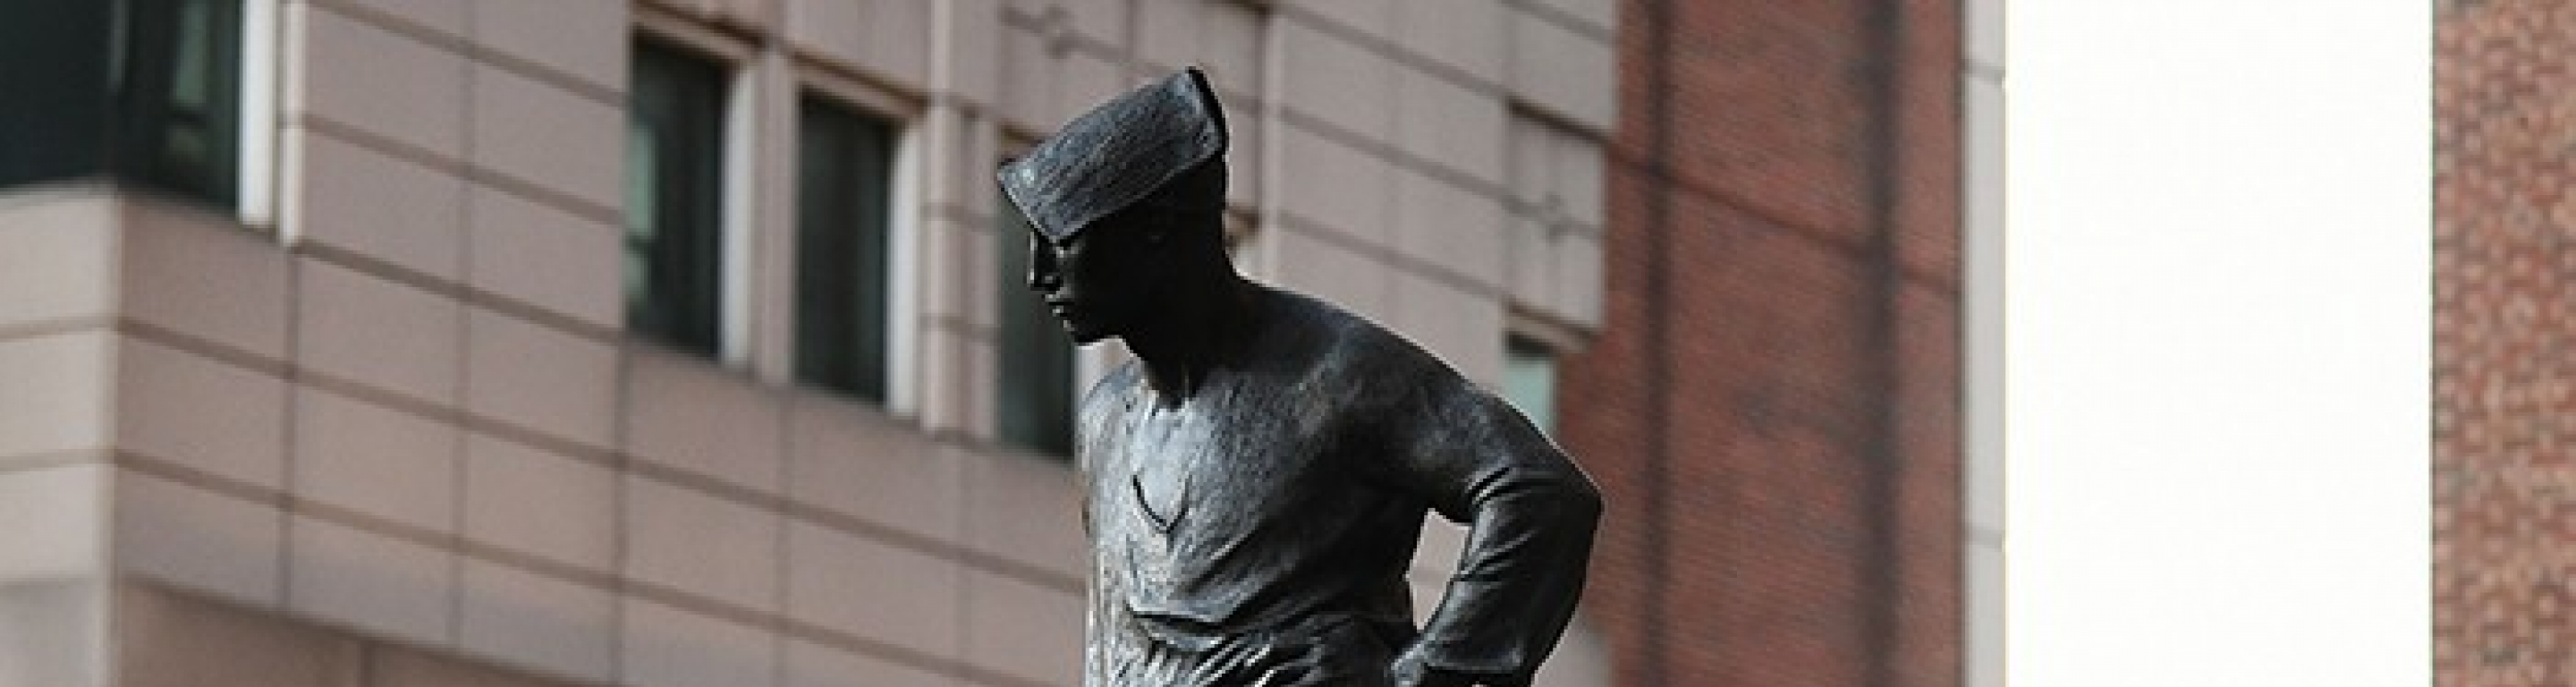 Le Marteleur, a sculpture of a miner outside Mudd Hall